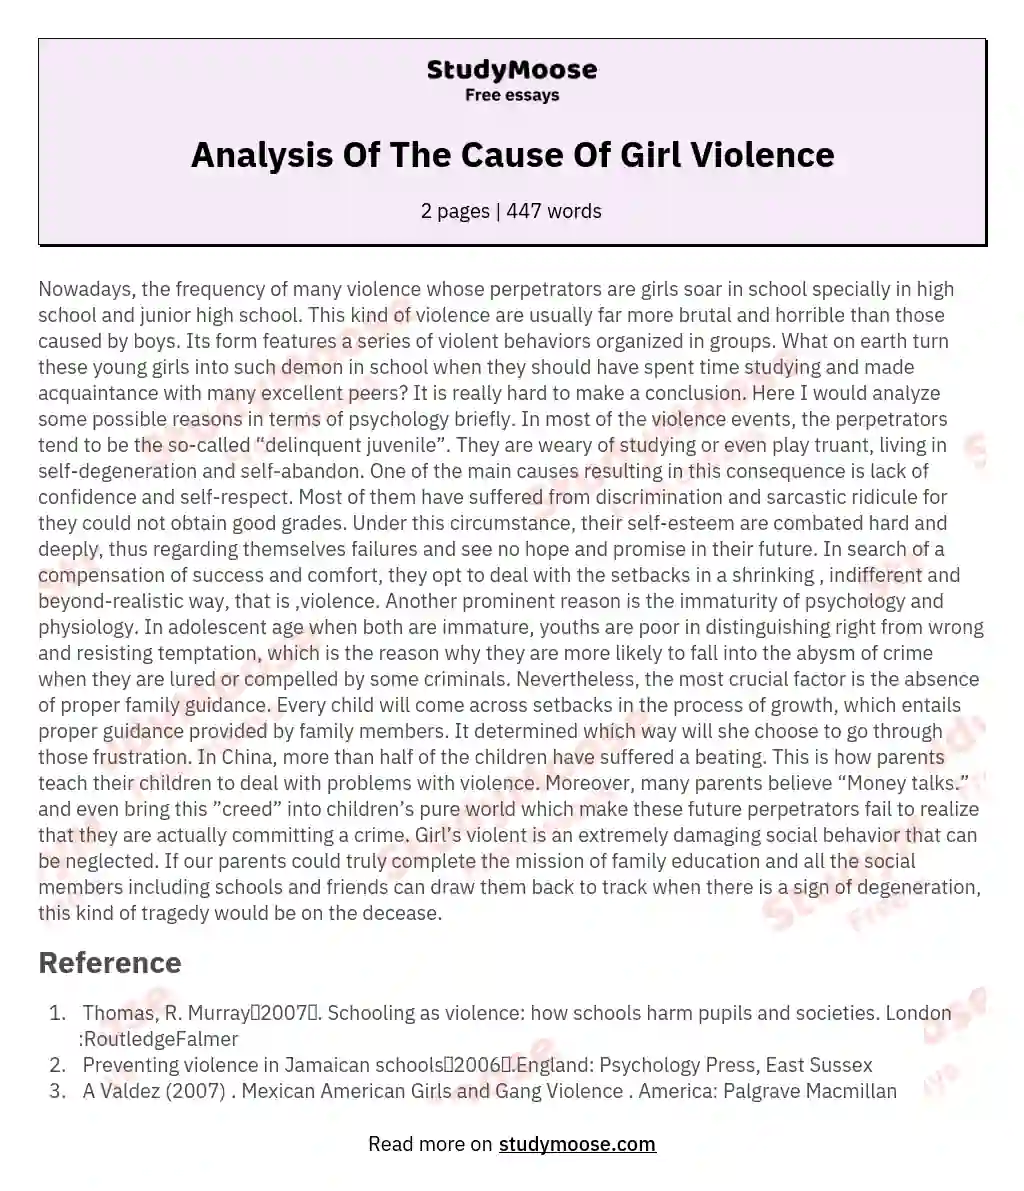 Analysis Of The Cause Of Girl Violence essay